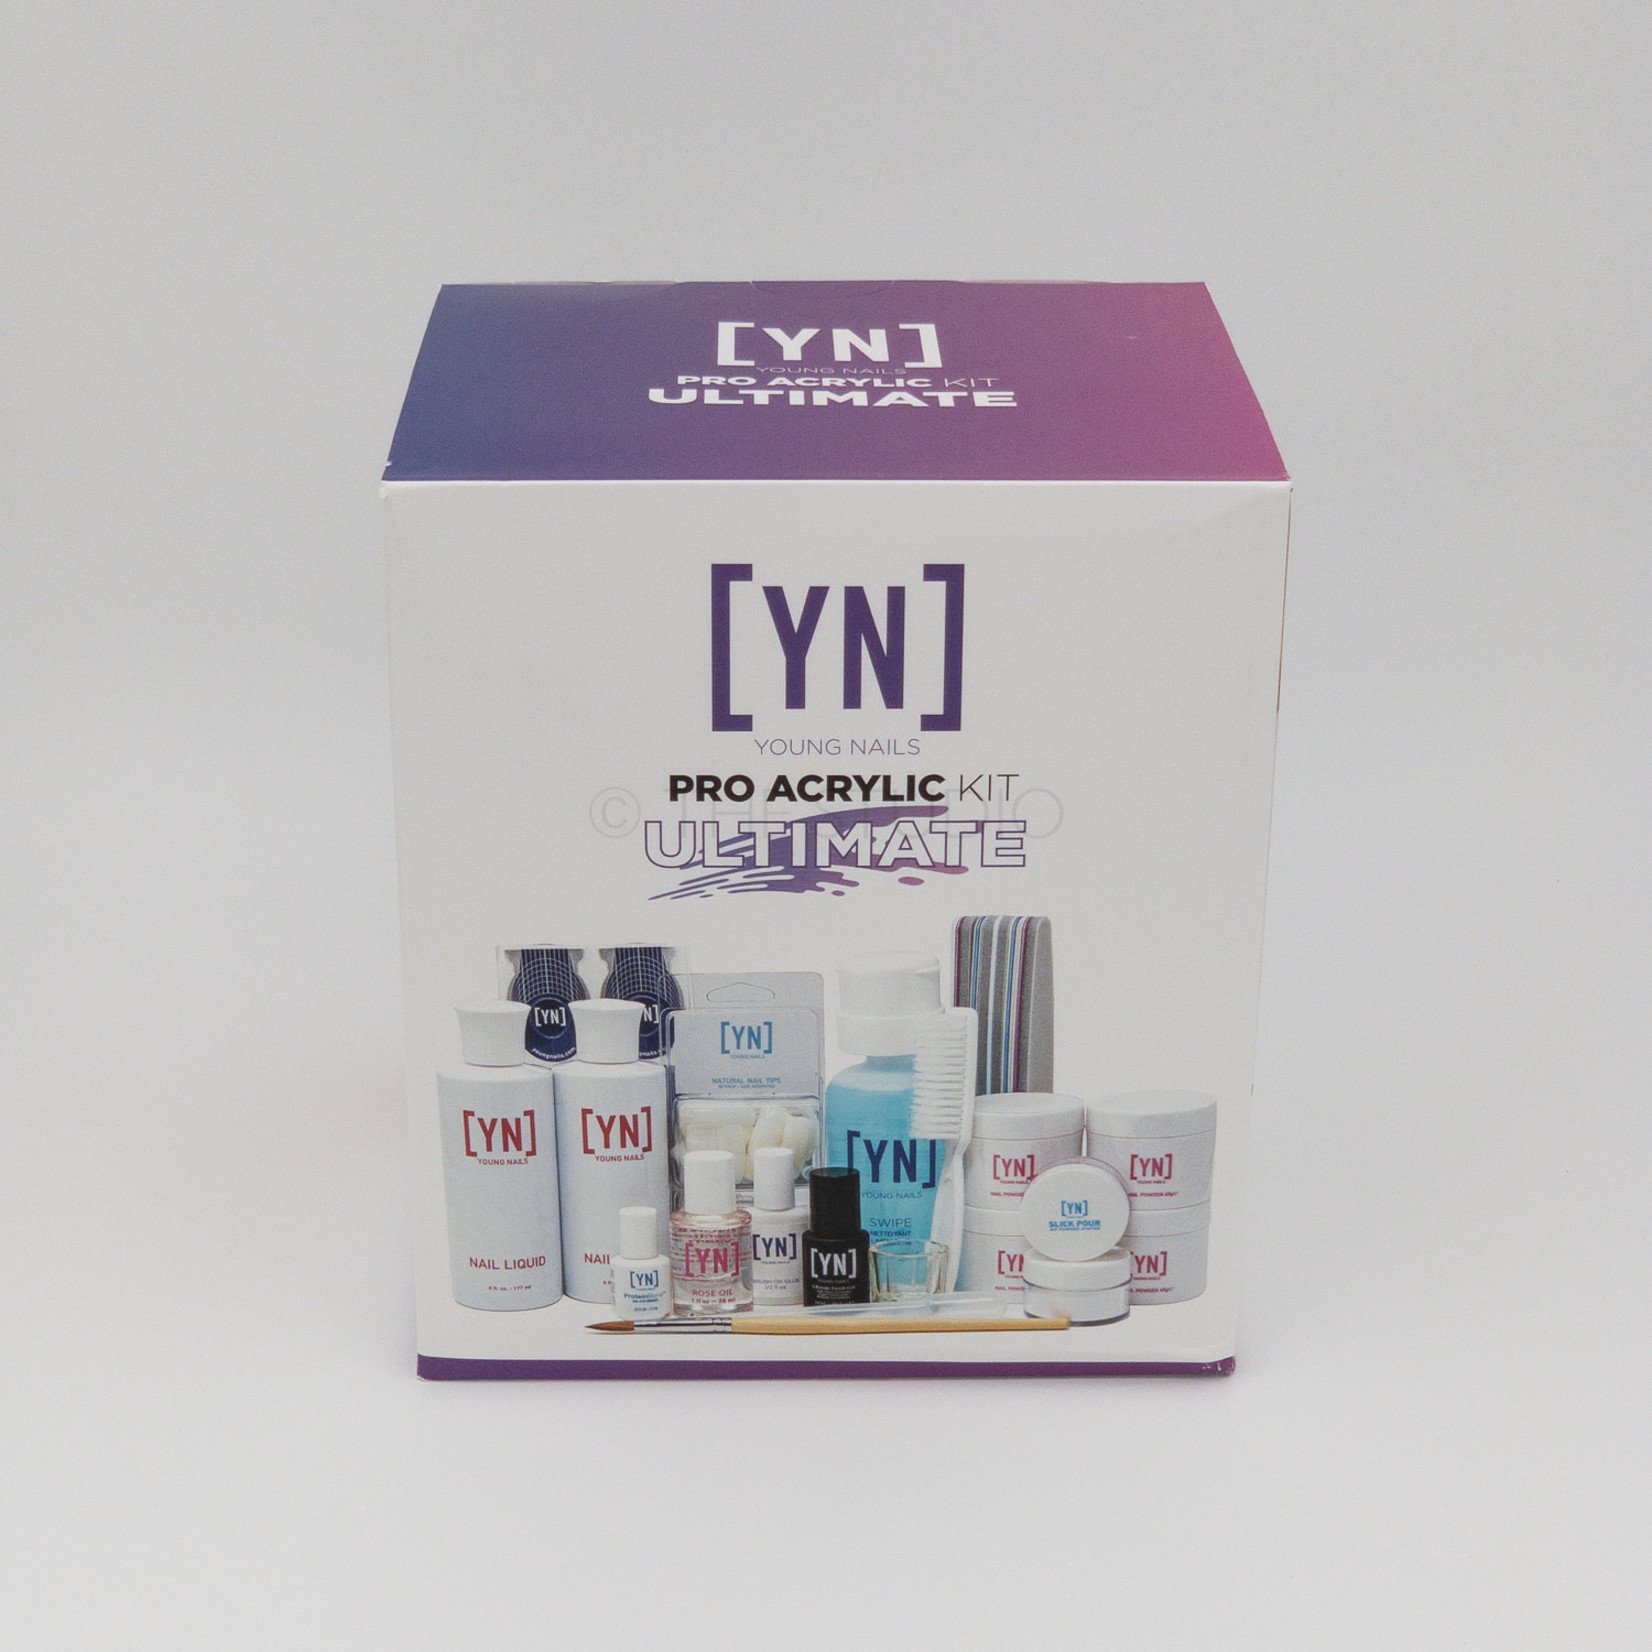 Young Nails - Pro Acrylic Kit - Ultimate - The Studio - Nail and Beauty  Supply